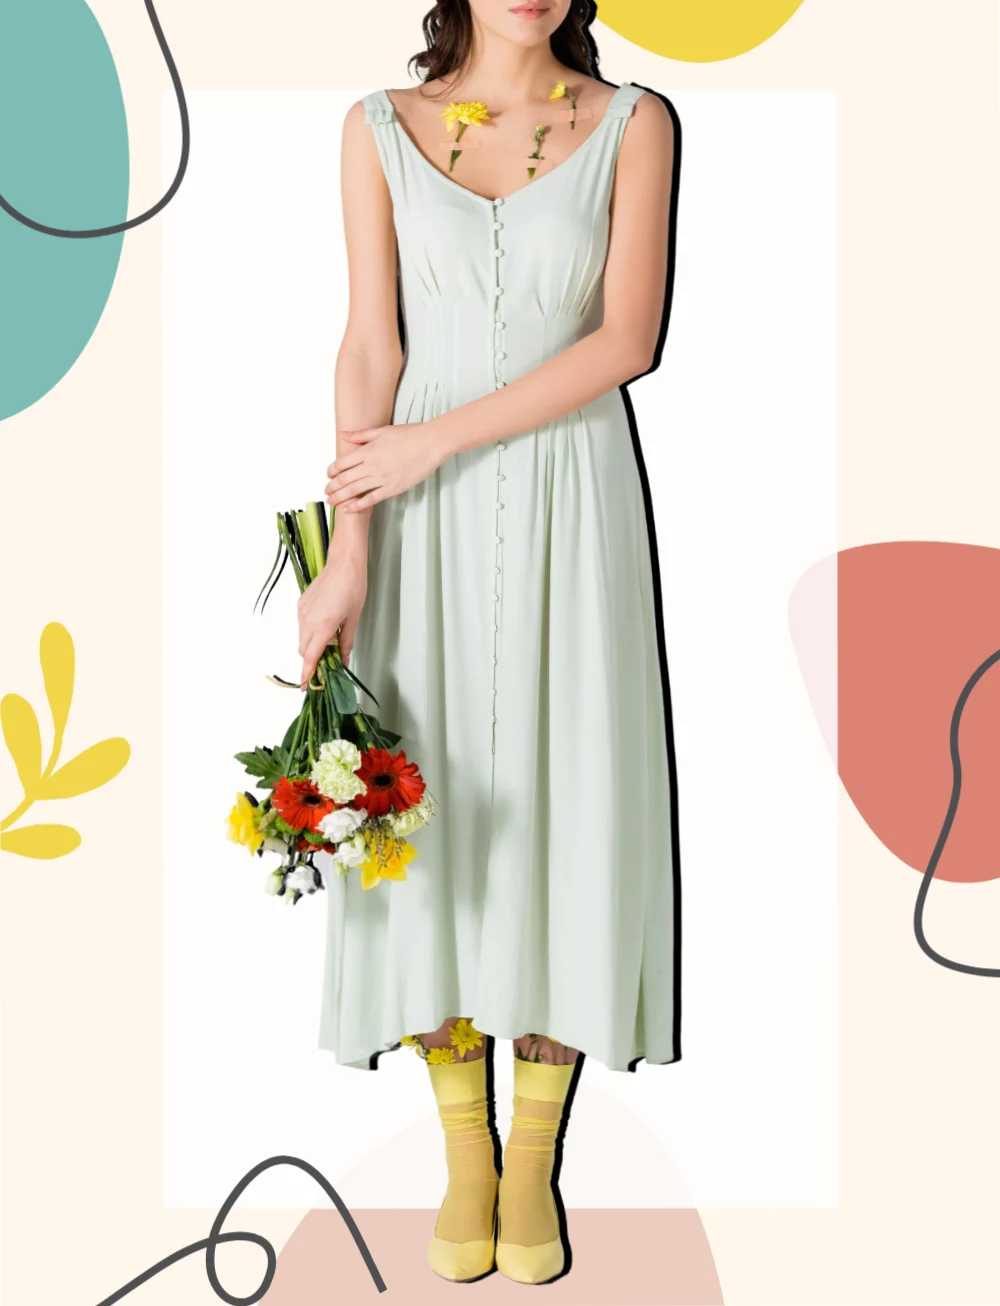 Woman wearing yellow color shoes with mint green dress outfit holding a bouquet of flowers over various shapes and line graphics.